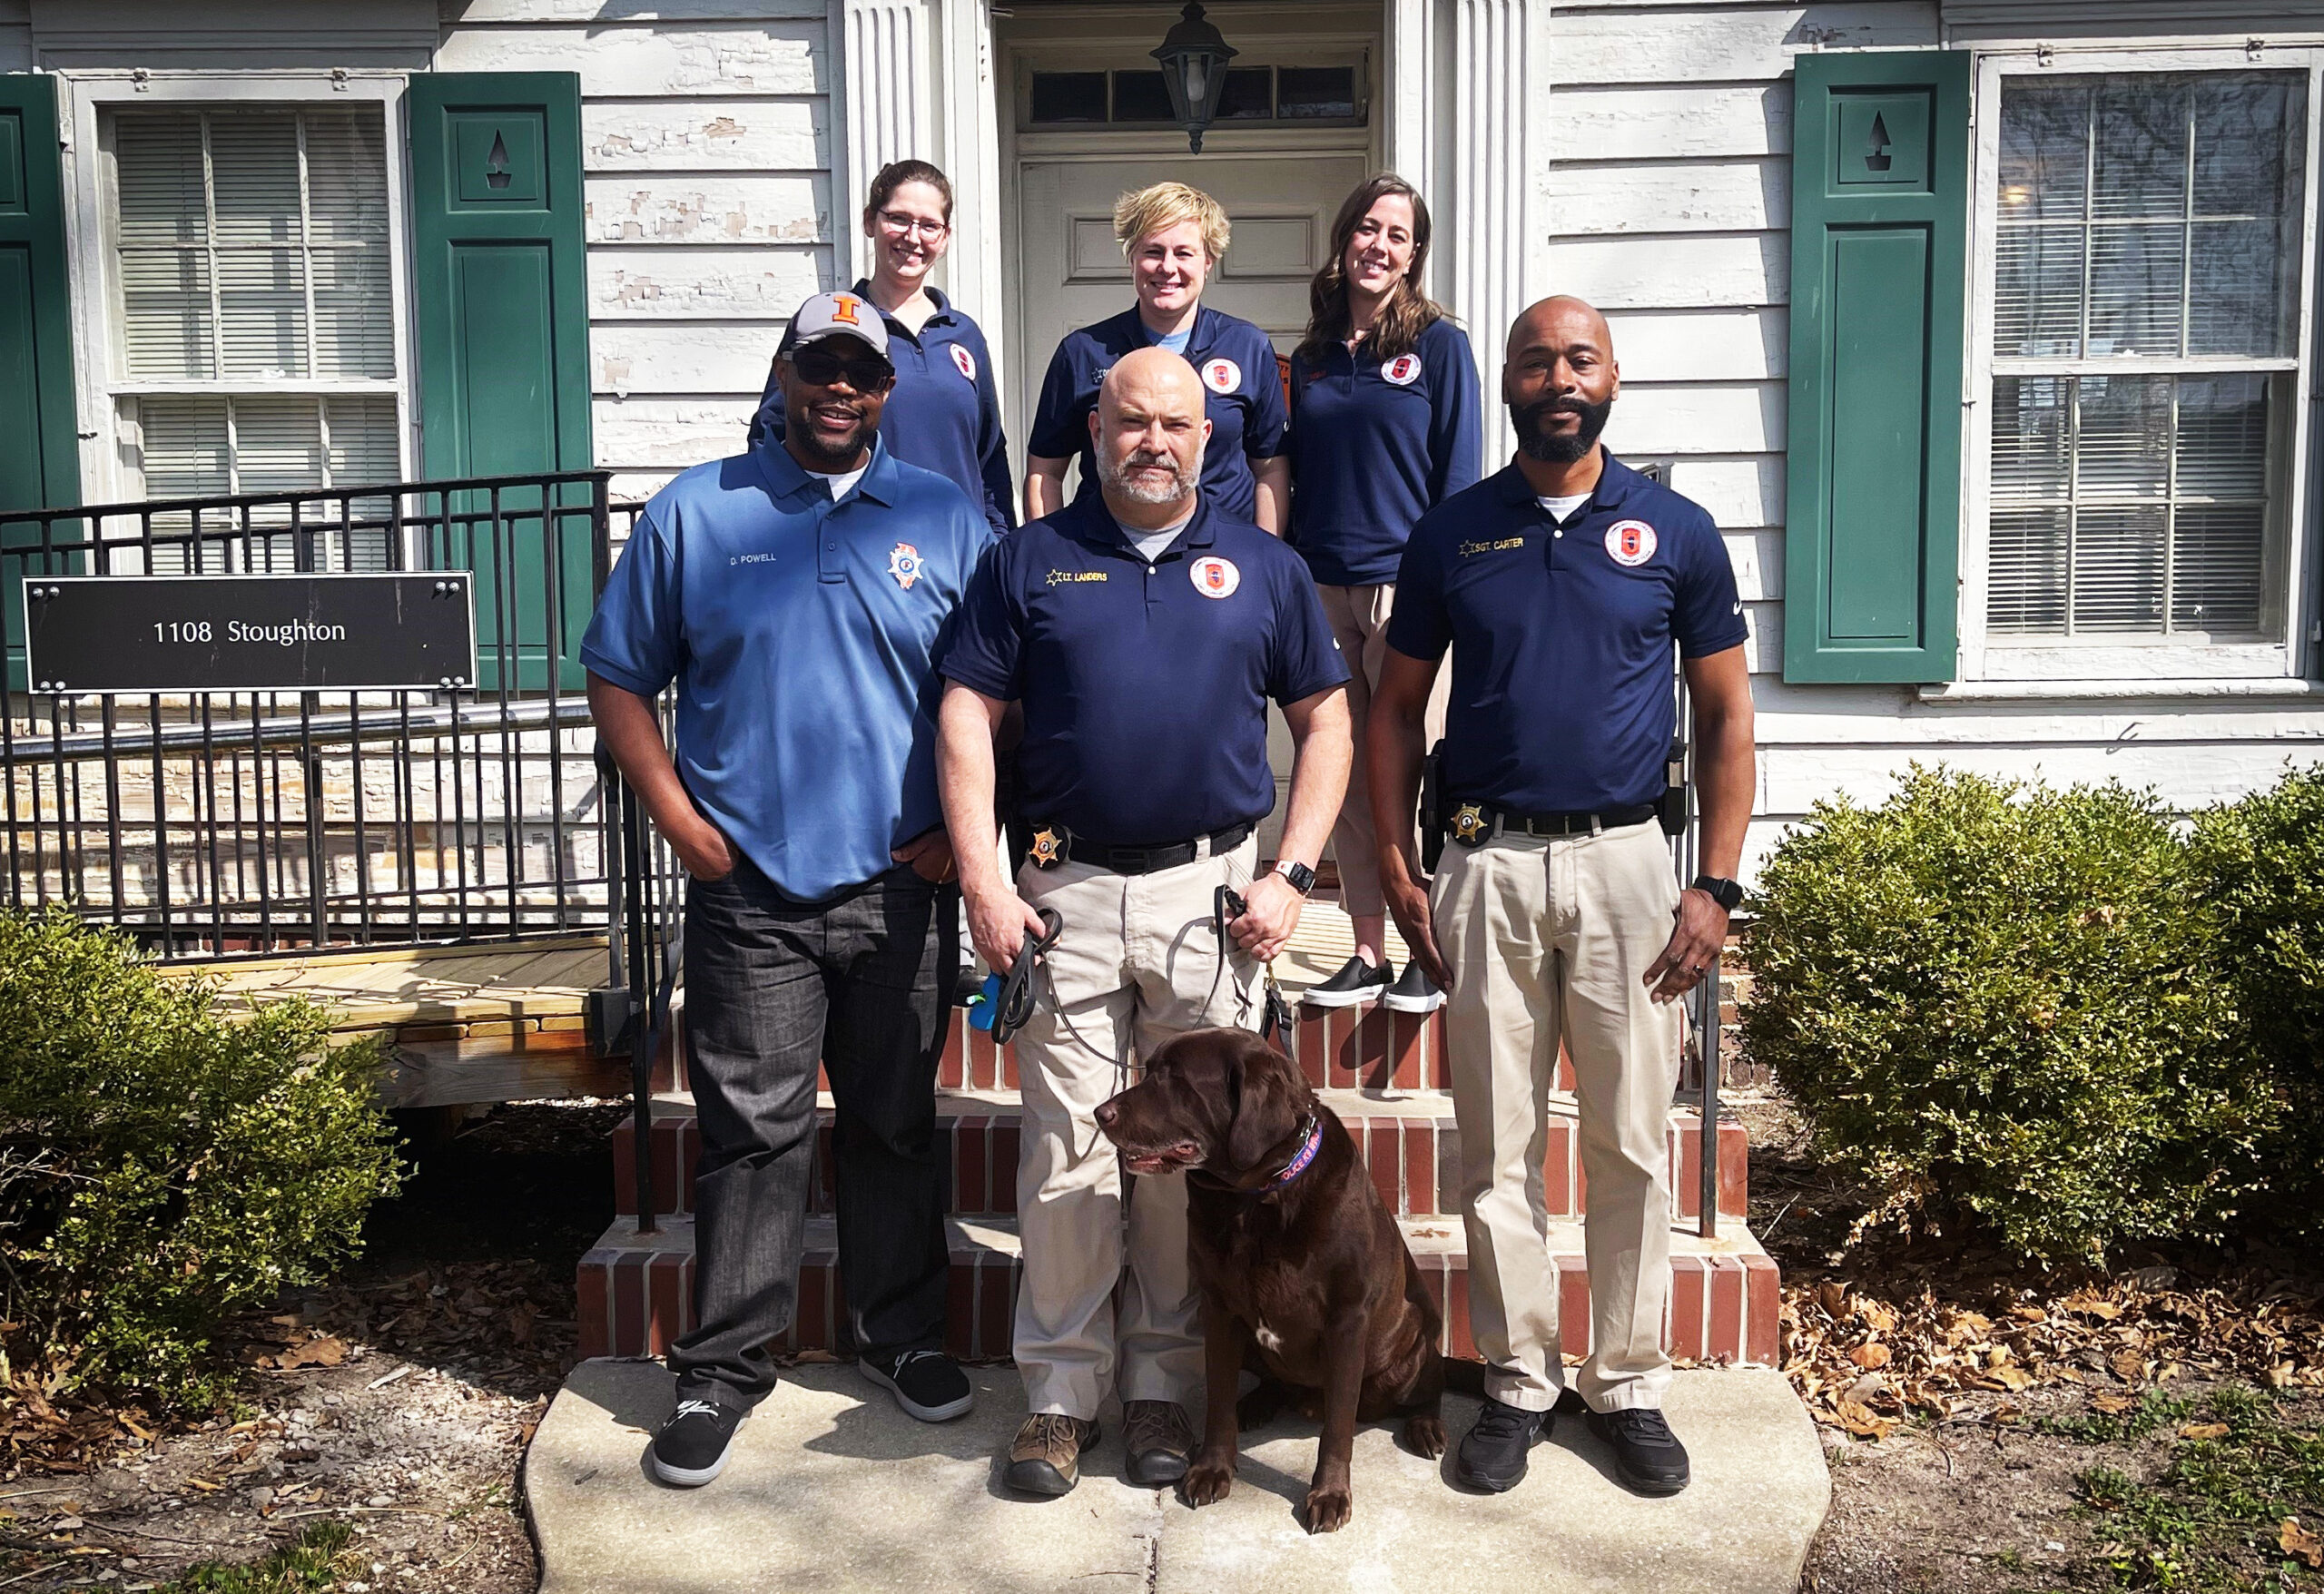 Six COAST team members and a dog pose for a photo on the front steps of the house where they work.